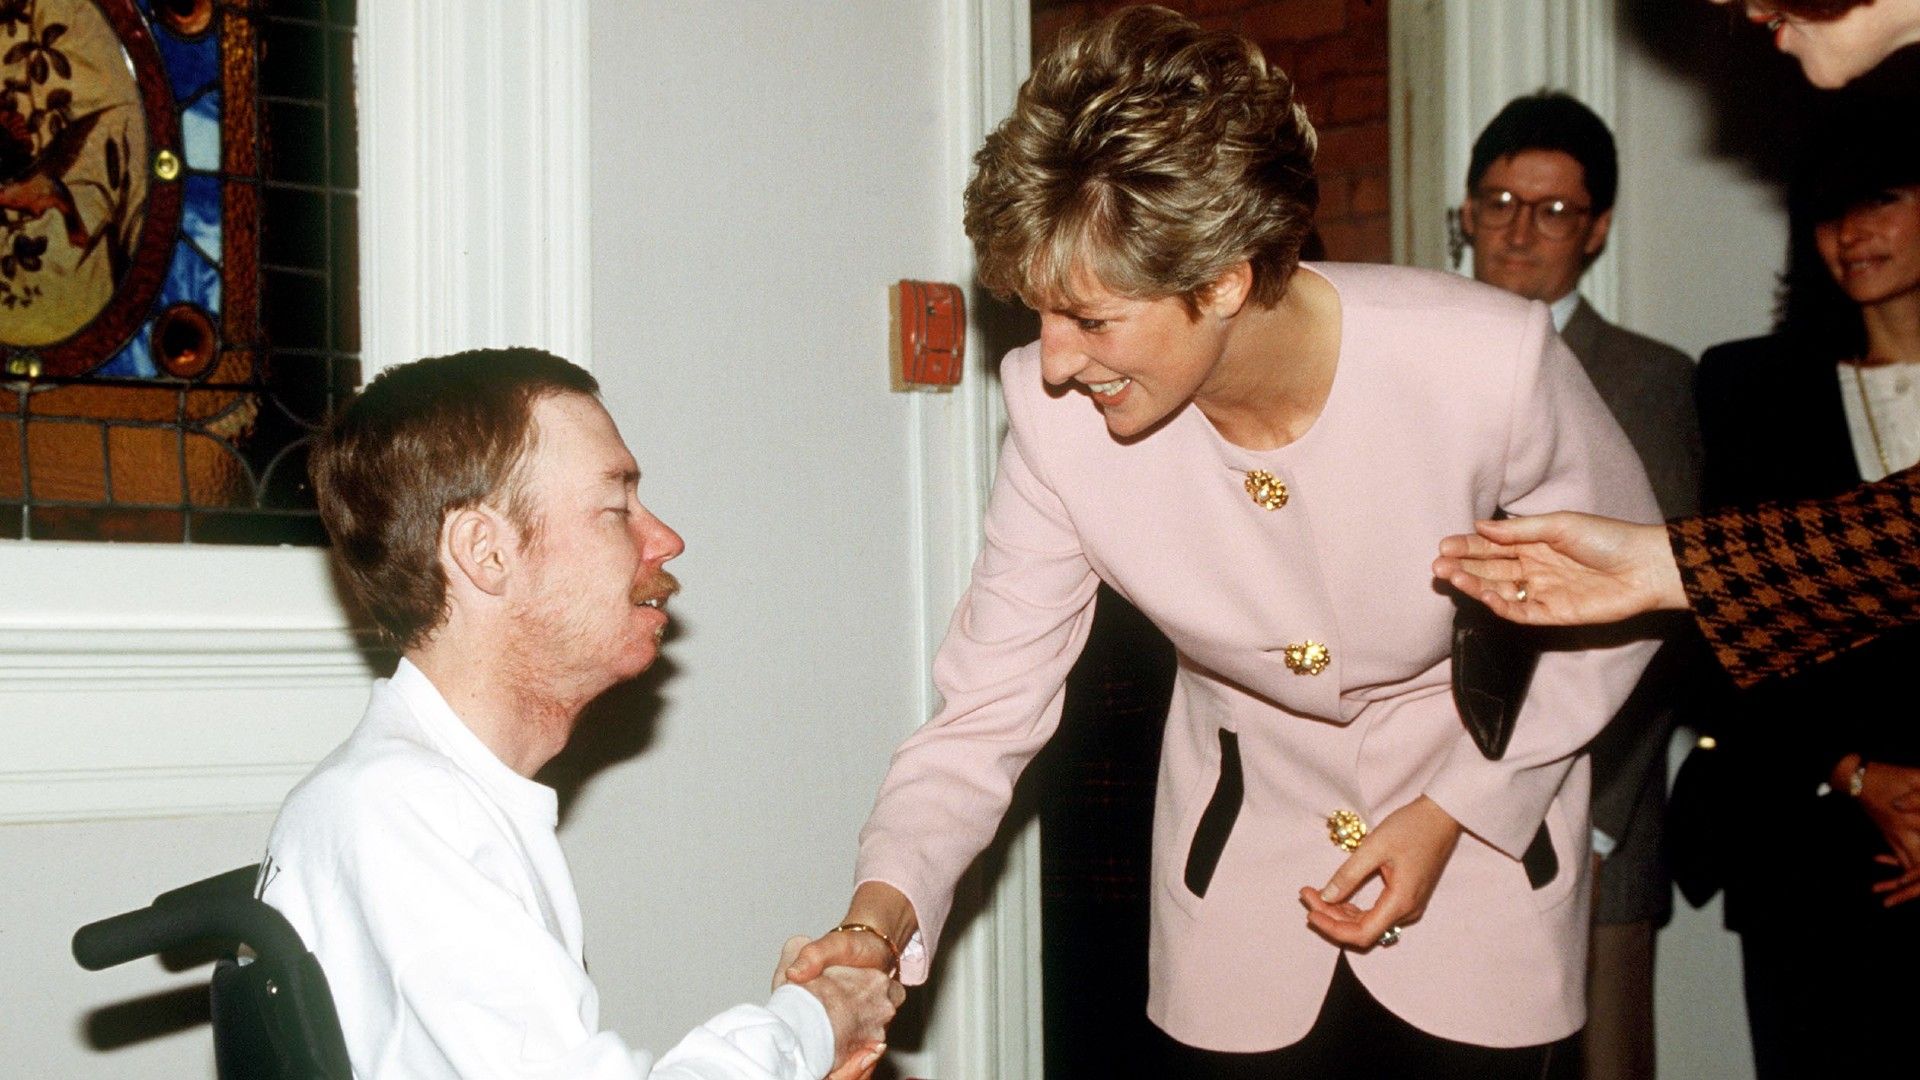 <p>                     Princess Diana did a huge amount of important work in her lifetime, but she is most often credited with being absolutely instrumental in undoing the stigma associated with AIDS – at a time when it was most needed.                   </p>                                      <p>                     At the height of the AIDS crisis in 1978, Diana regularly visited patients living with the illness. And images of her hugging and shaking hands with patients were revolutionary in reminding people that AIDS was not contagious via typical social conduct, and in reducing the stigma of the illness for people living with it.                   </p>                                      <p>                     At the time, during a visit to one hospital, she said, "HIV does not make people dangerous to know. You can shake their hands and give them a hug. Heaven knows they need it. What's more, you can share their homes, their workplaces, and their playgrounds and toys."                   </p>                                      <p>                     Speaking about Diana’s impact, the chief executive of the <a href="https://www.tht.org.uk/news/how-princess-diana-challenged-hiv-stigma-every-hug">Terrence Higgins Trust</a>, Ian Green, said in 2021, "With every gloveless handshake and every hug, she helped to challenge the hysteria and fear which was rife at the time. I truly believe we wouldn’t be where we are today without her.                   </p>                                      <p>                     "[And] for people living with HIV, her comments marked the start of her monumental efforts to see them treated with dignity, respect, and compassion. Of course, it didn’t change everything overnight and abhorrent stigma and discrimination remain today, but the Princess’s impact was felt worldwide."                   </p>